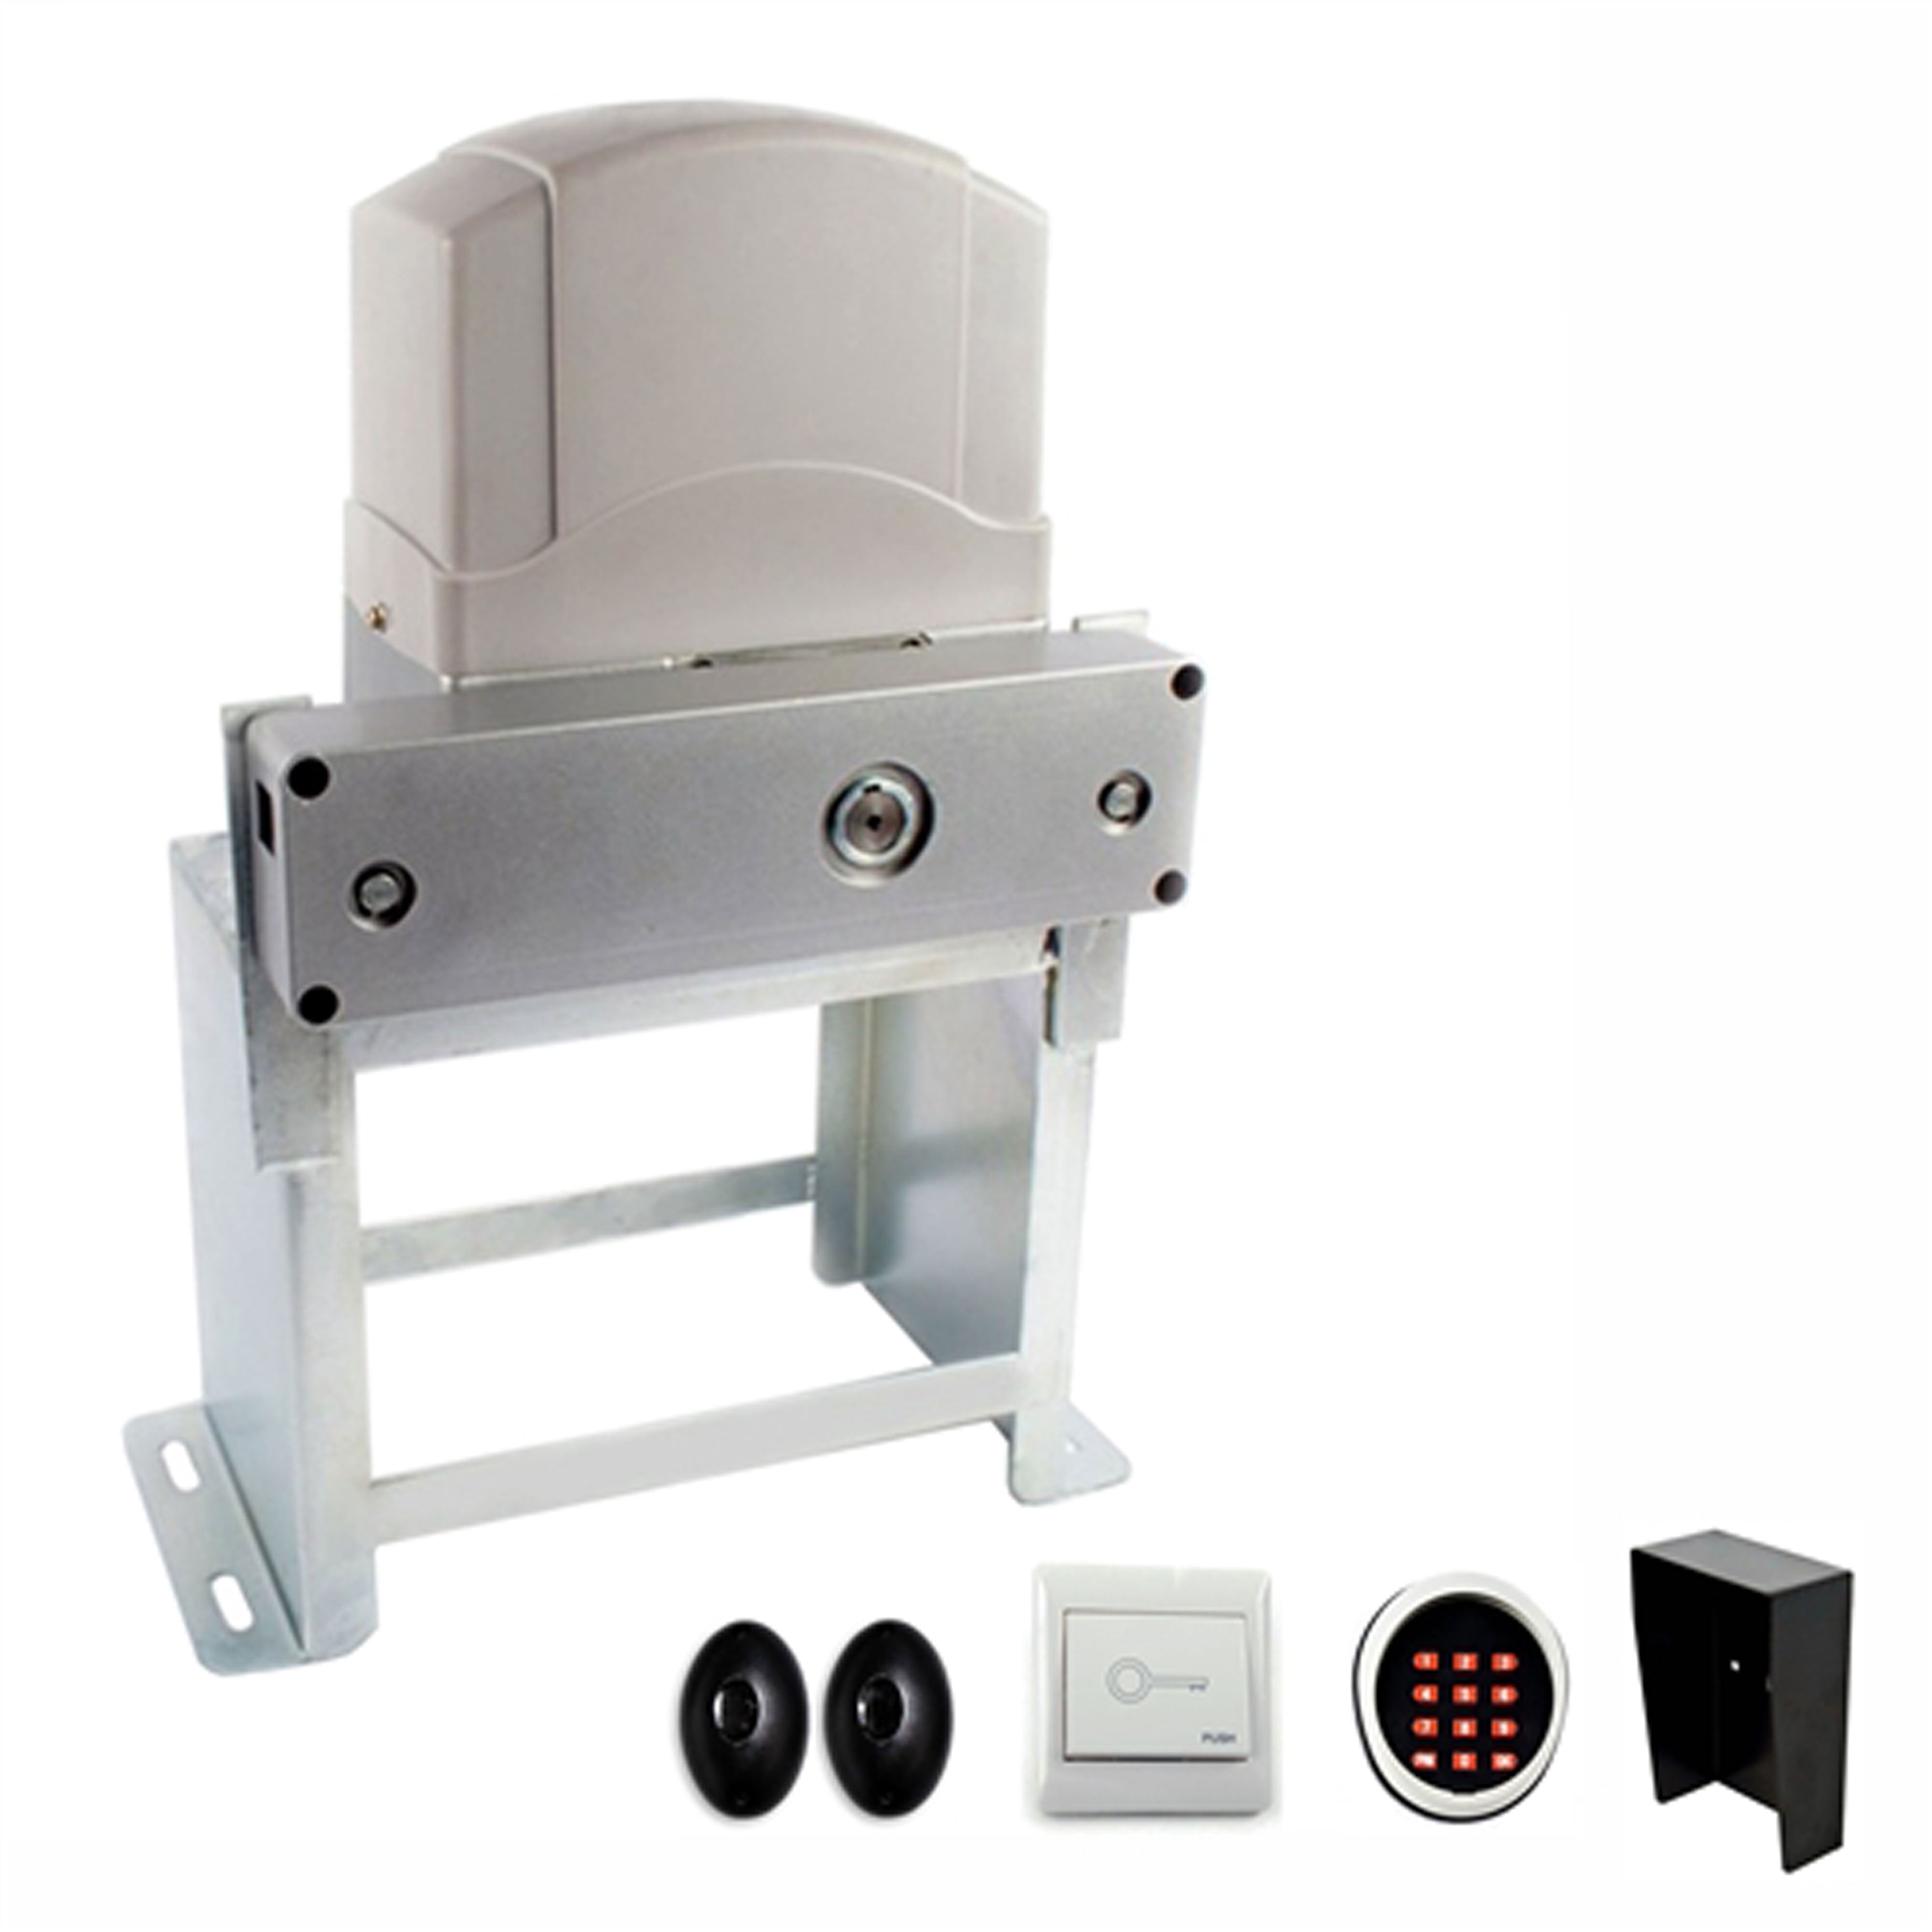 Ac2700acc-unb Accessories Kit Sliding Gate Opener For Sliding Gates Up To 65 Ft. Long & 2700 Lbs